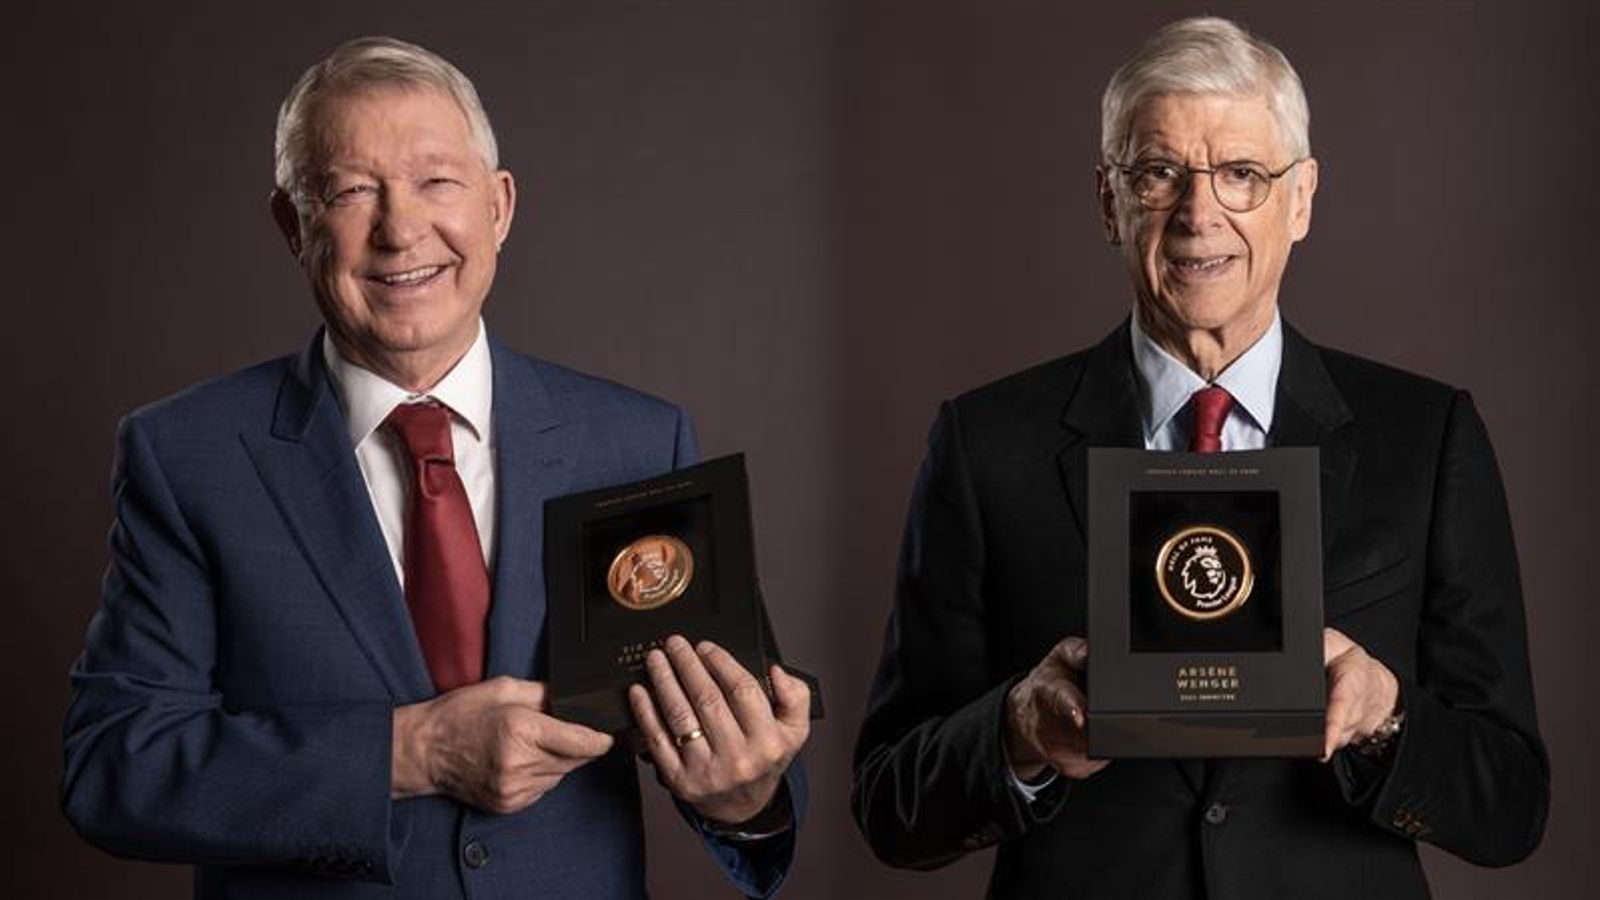 Premier League Hall of Fame: Arsene Wenger and Sir Alex Ferguson become first managers to be inducted | Football News